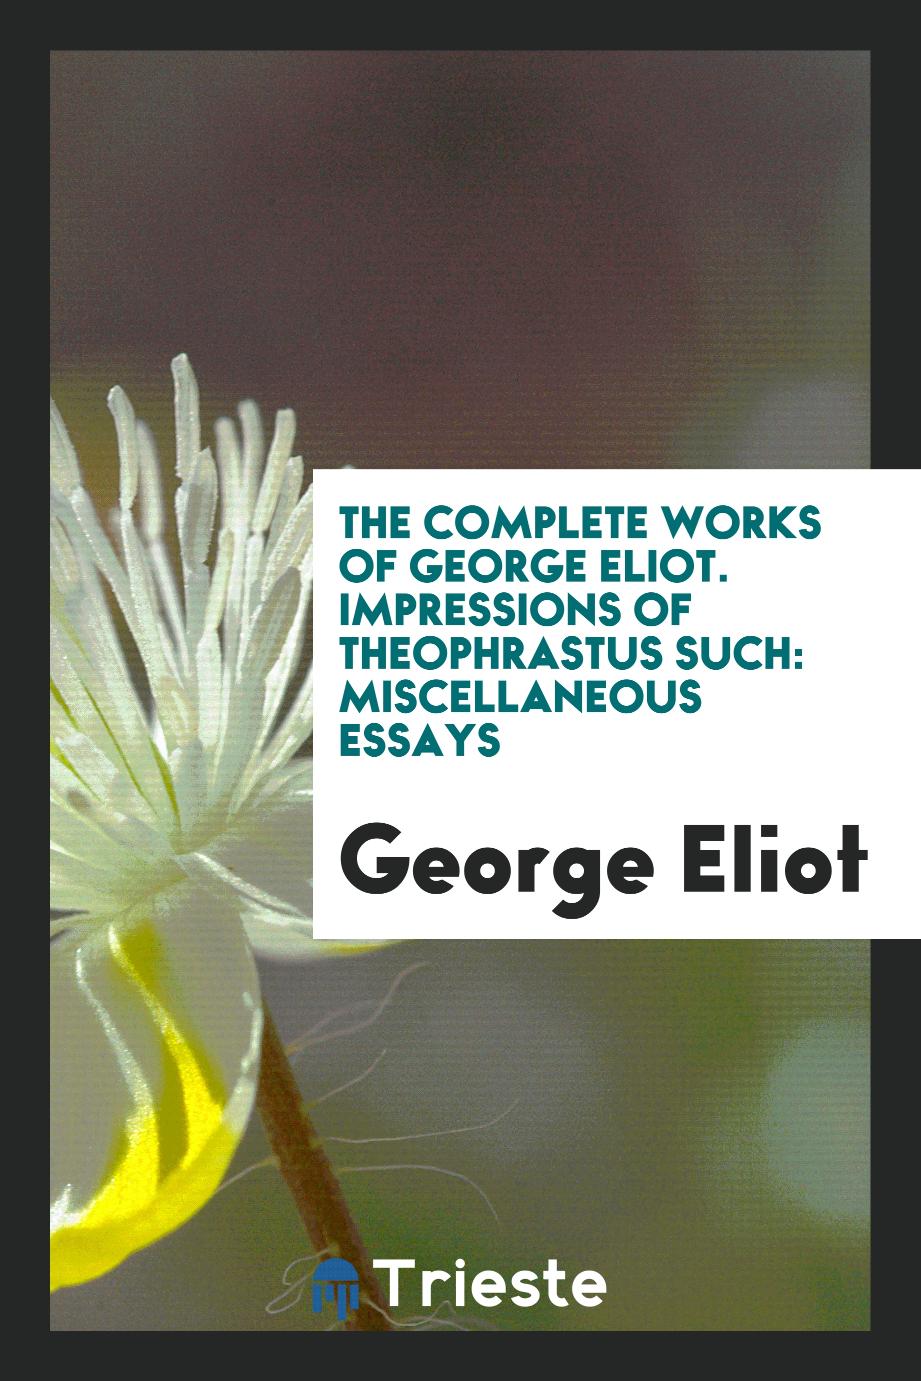 The Complete Works of George Eliot. Impressions of Theophrastus Such: Miscellaneous Essays